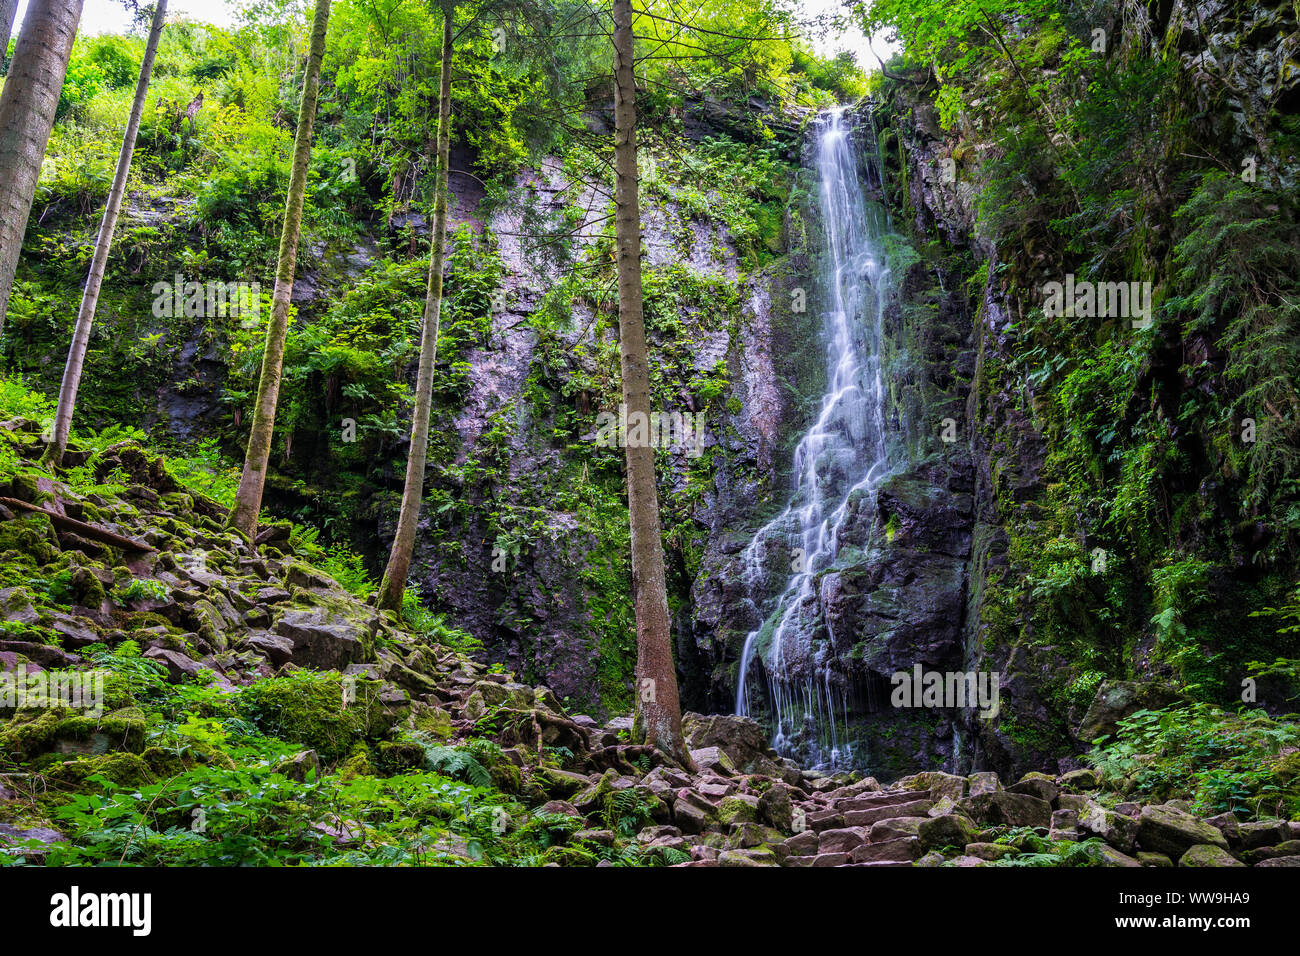 Germany, Magic black forest waterfall in untouched nature landscape called burgbachwasserfall in green paradise like scenery Stock Photo